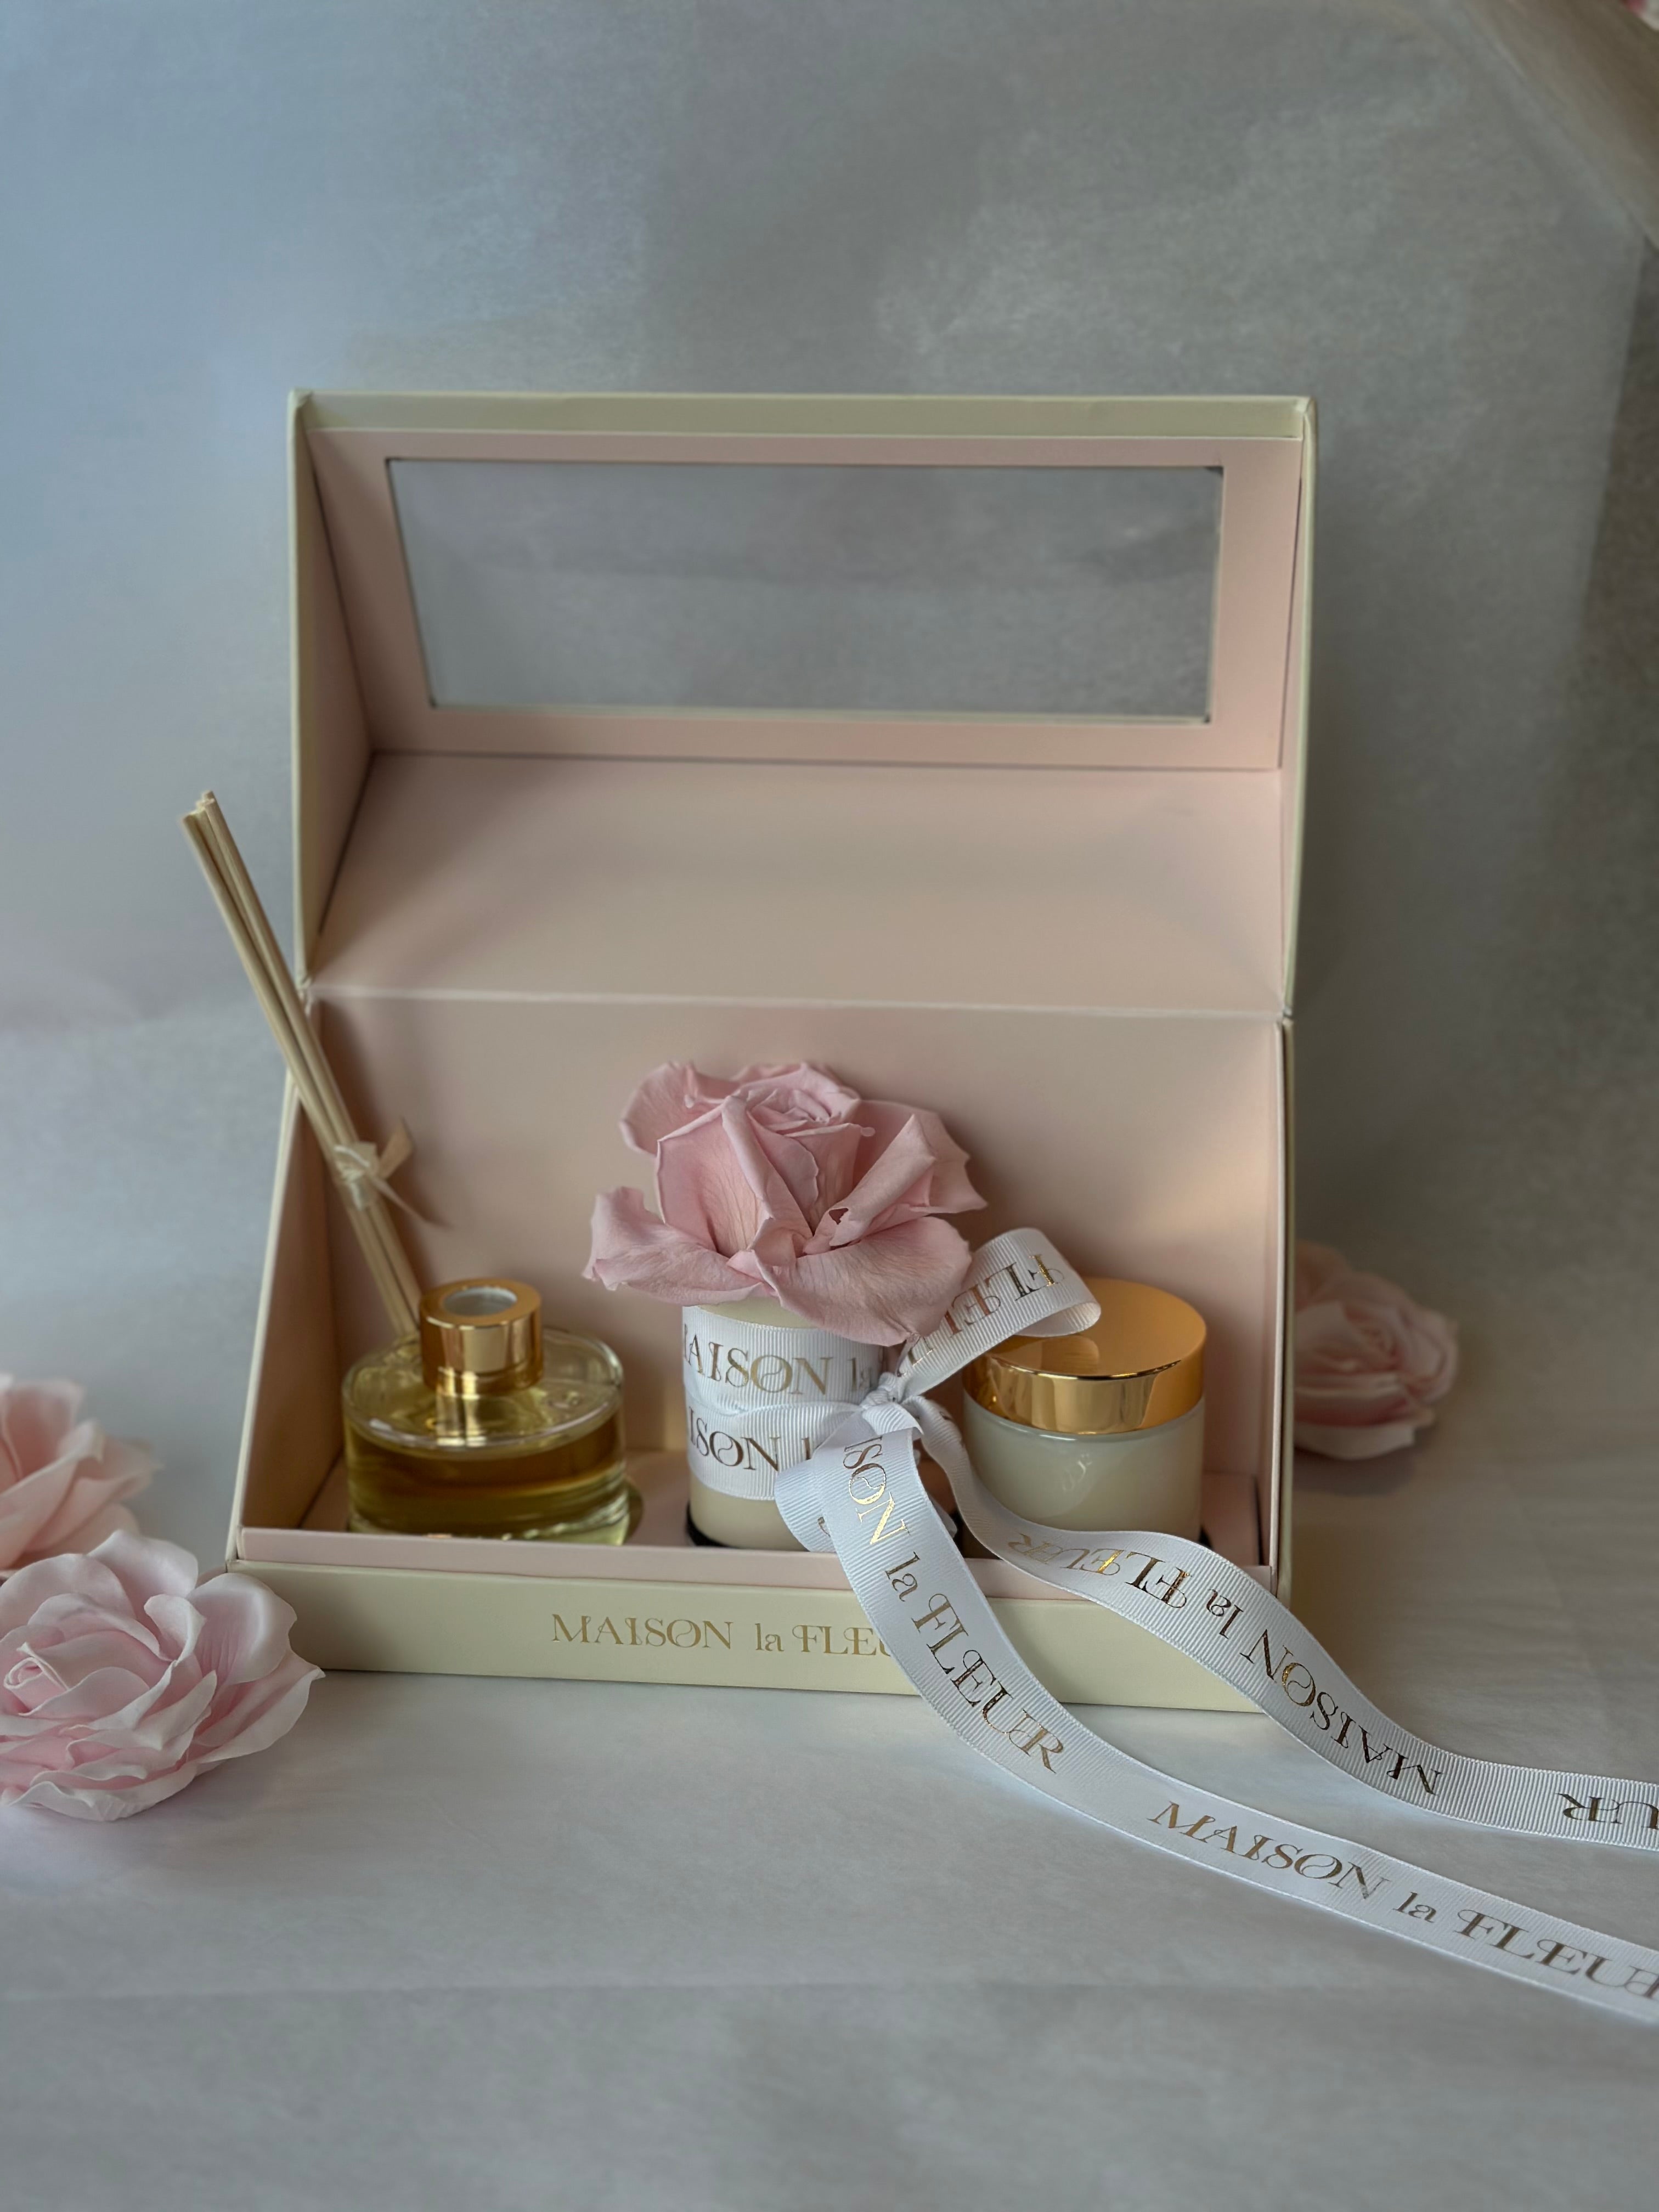 Scent of a woman gift set